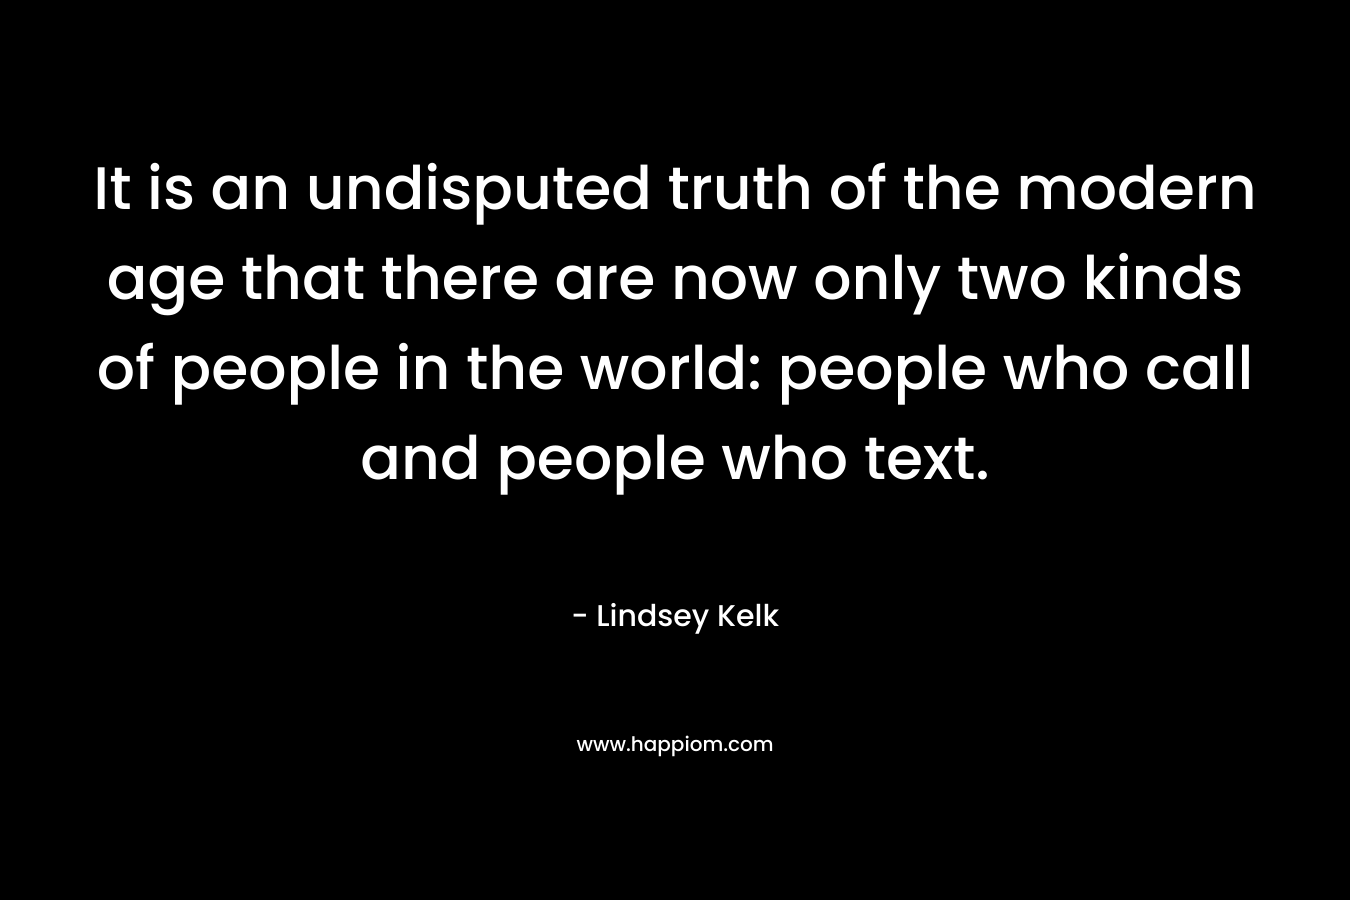 It is an undisputed truth of the modern age that there are now only two kinds of people in the world: people who call and people who text. – Lindsey Kelk